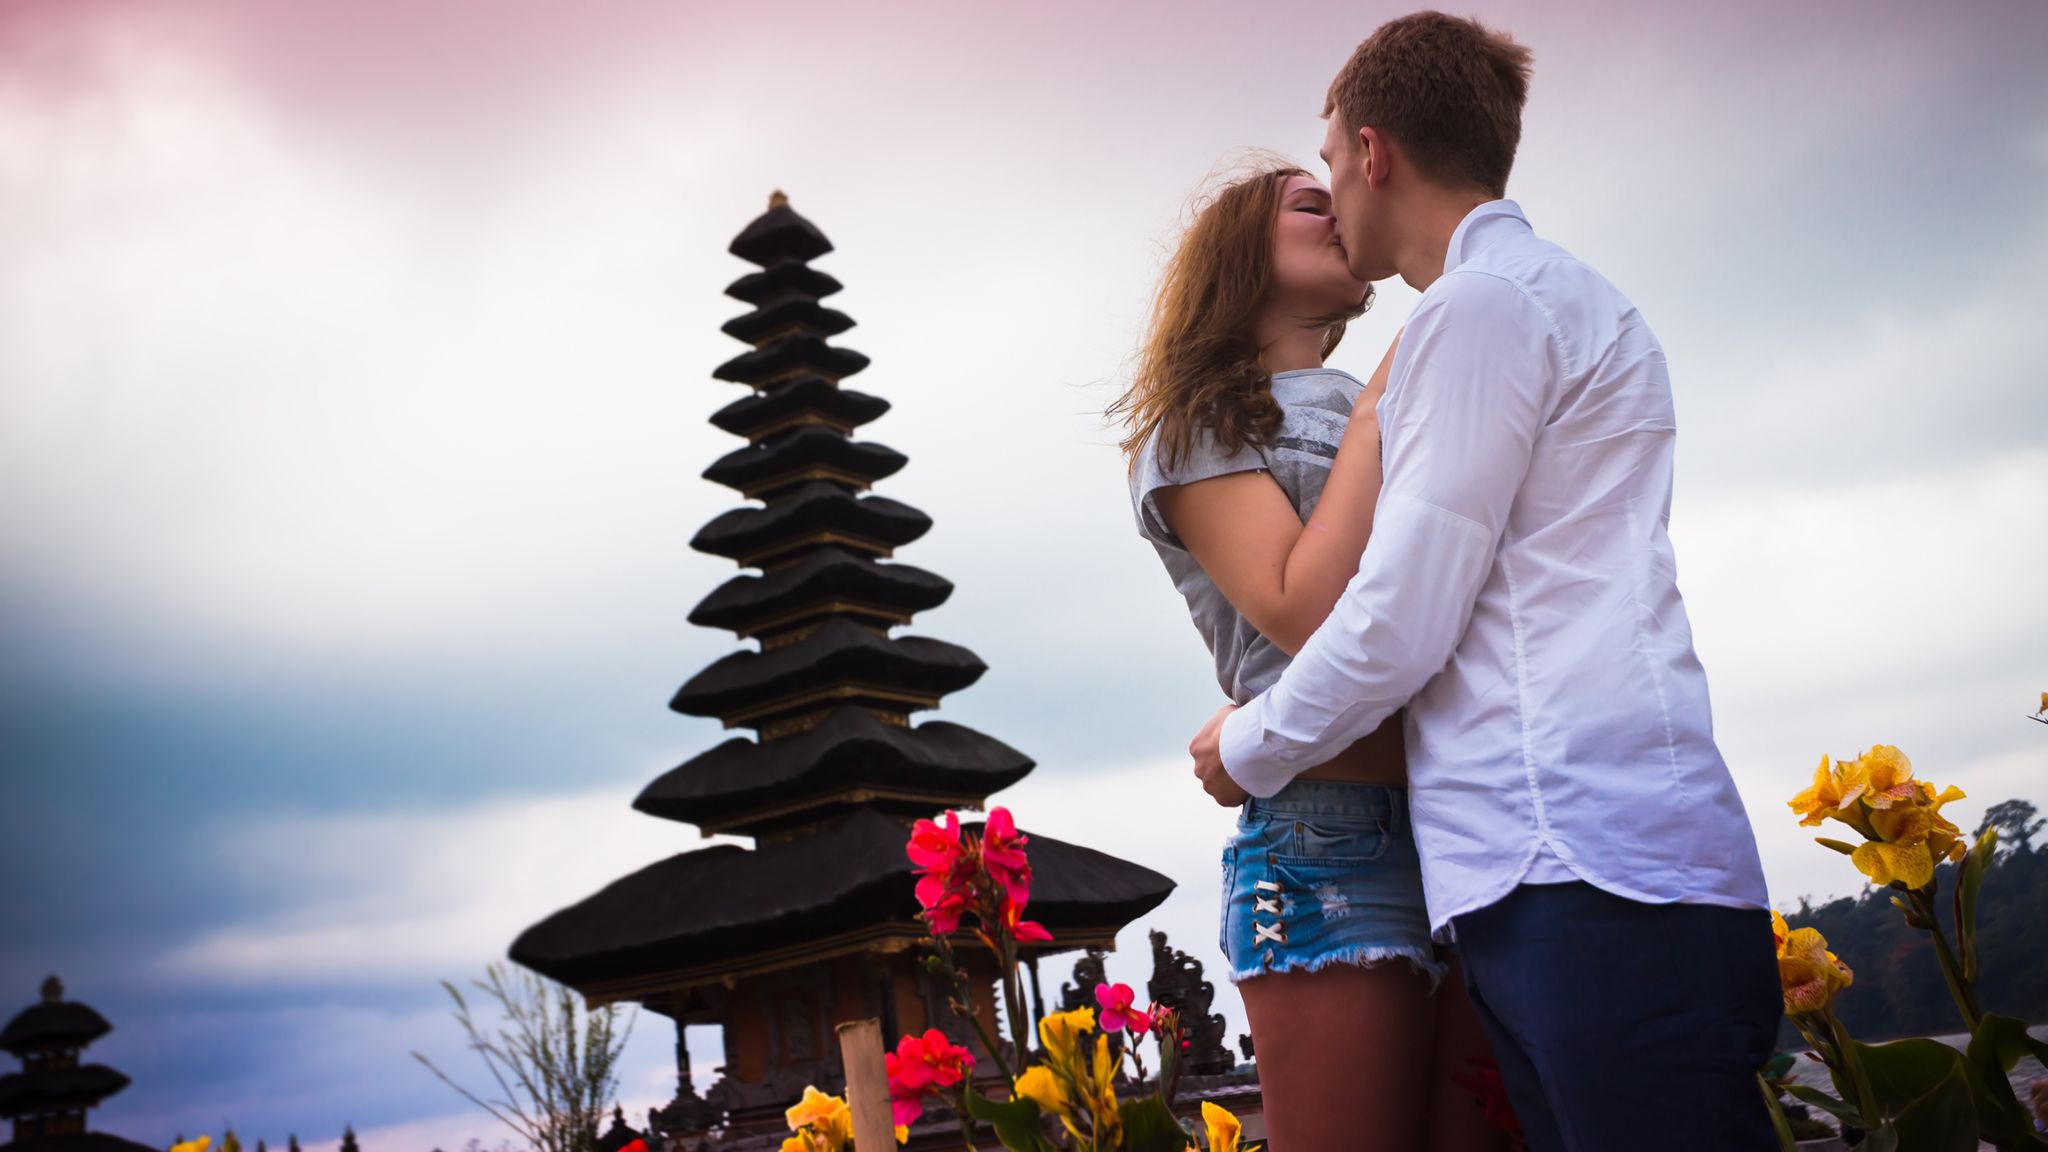 bali unmarried couples tourist